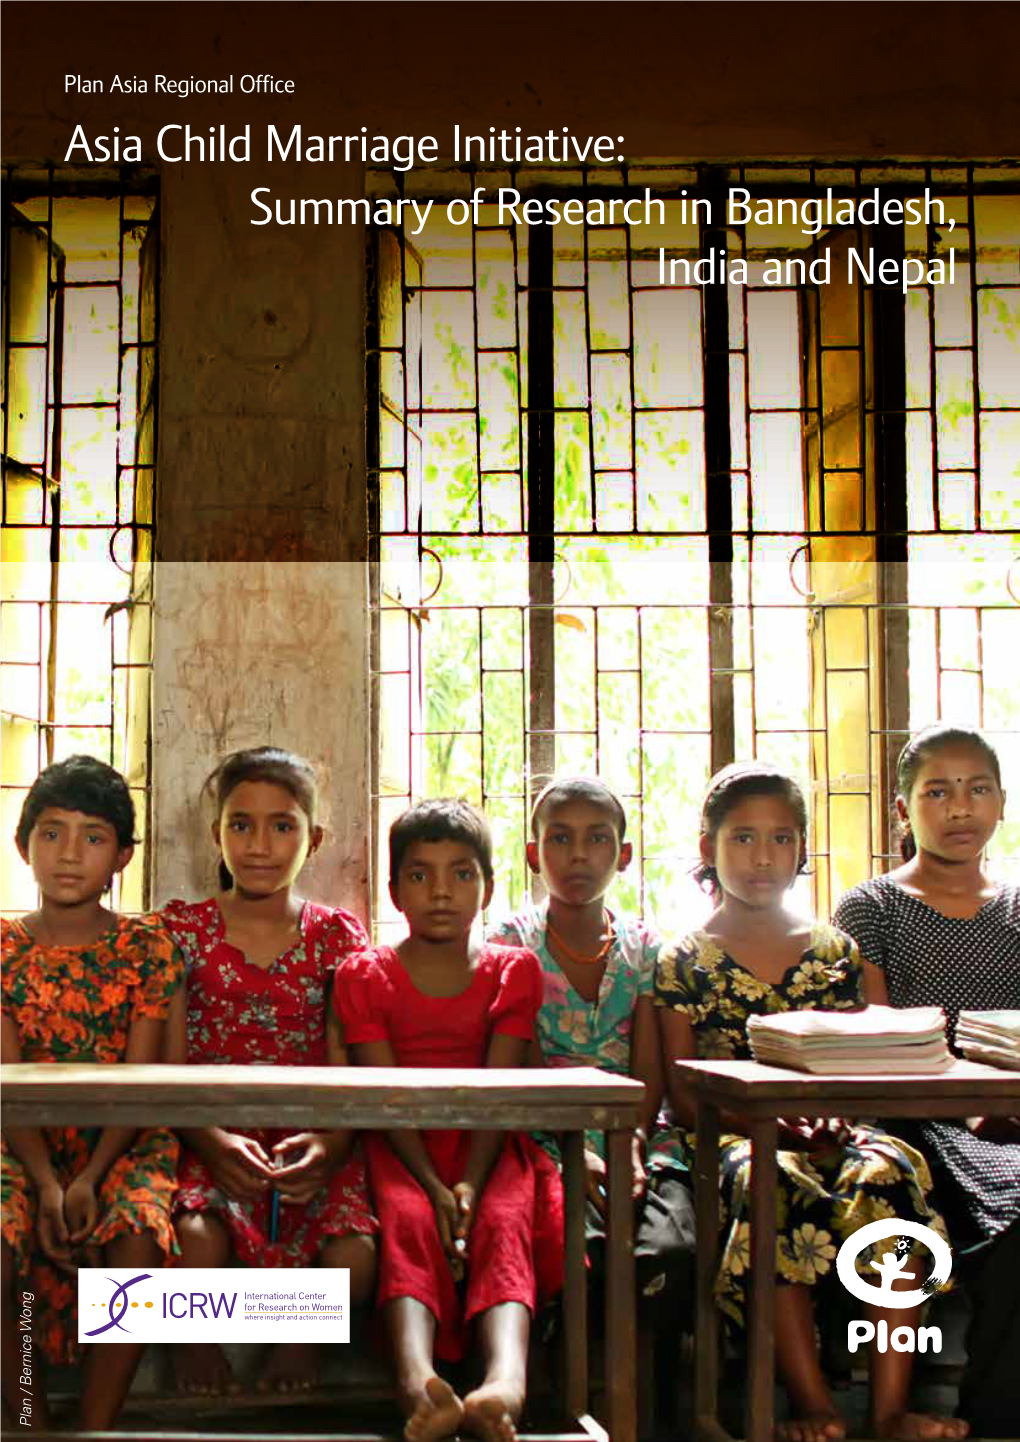 Asia Child Marriage Initiative: Summary of Research in Bangladesh, India and Nepal